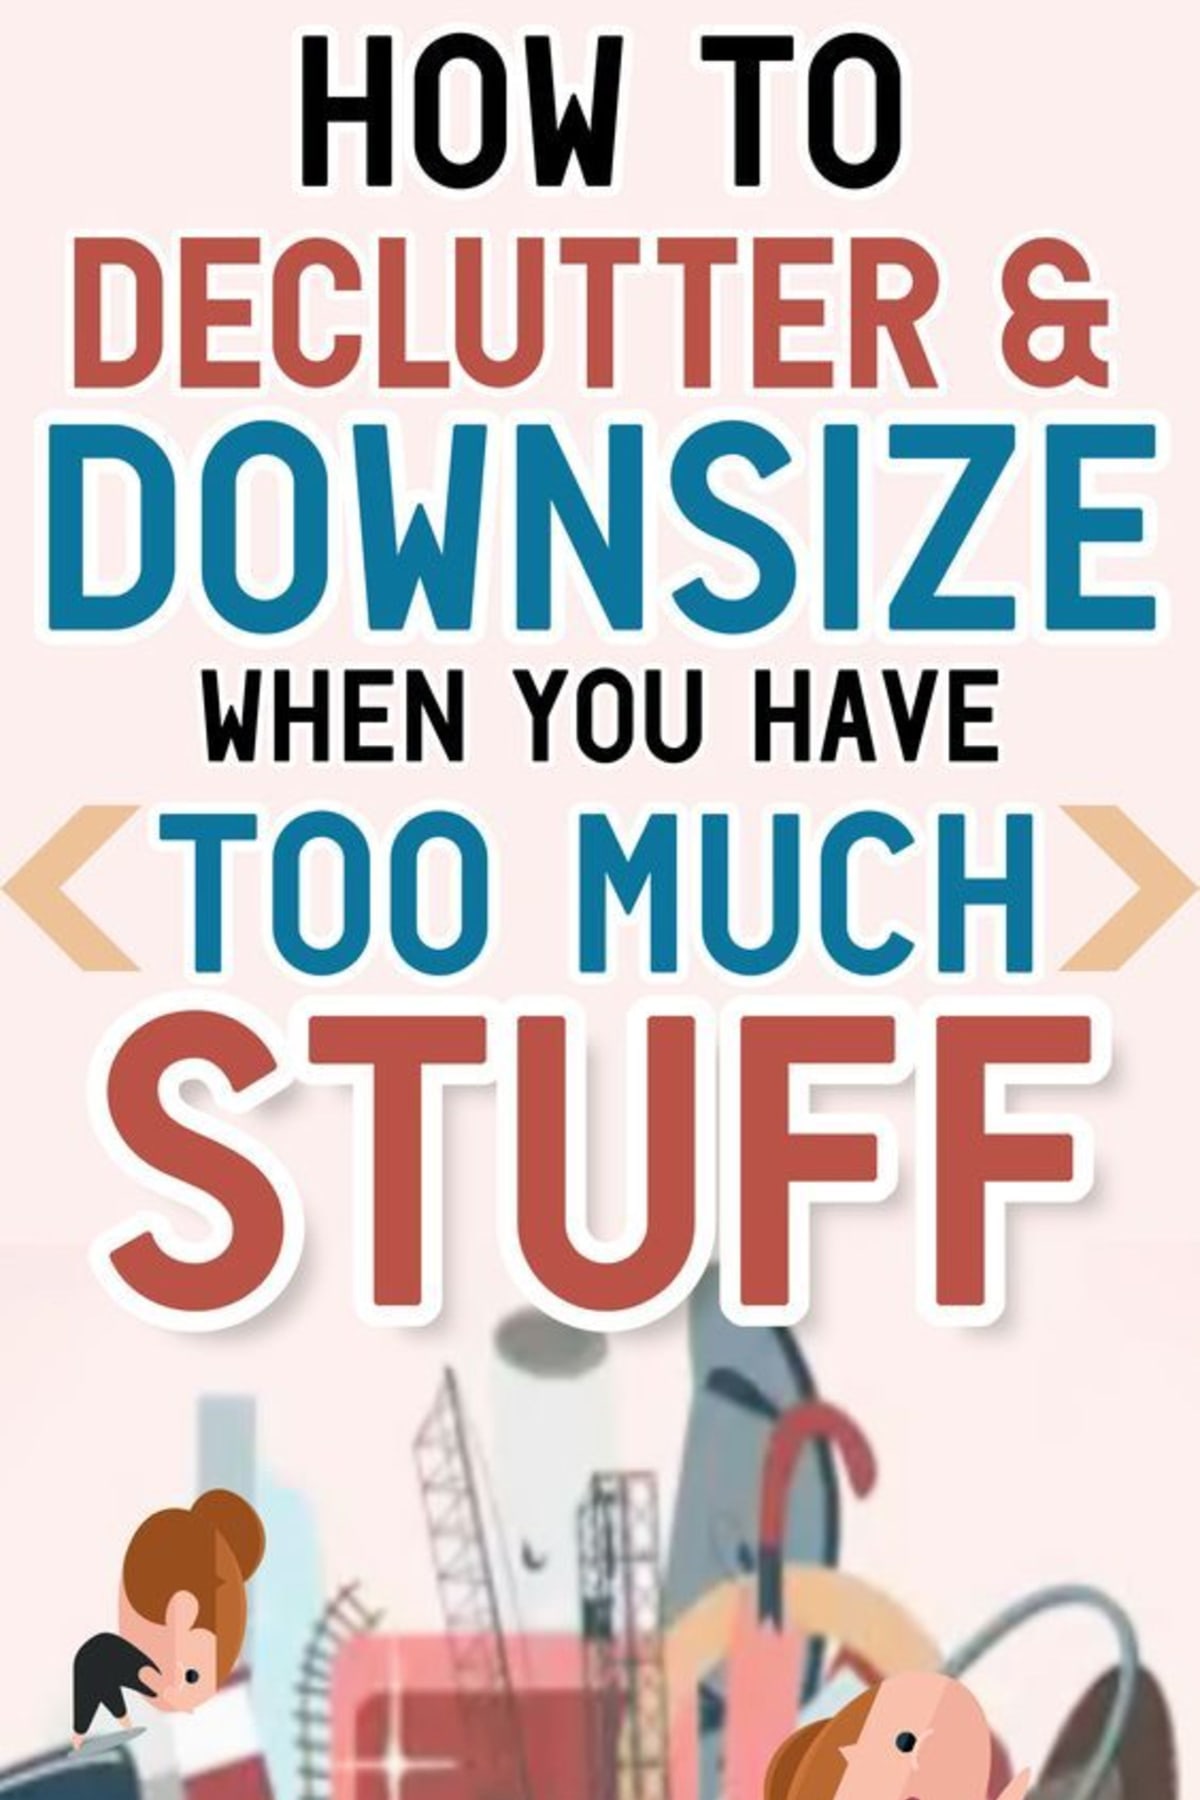 How To Downsize and Declutter Your Home When You Have Too Much STUFF